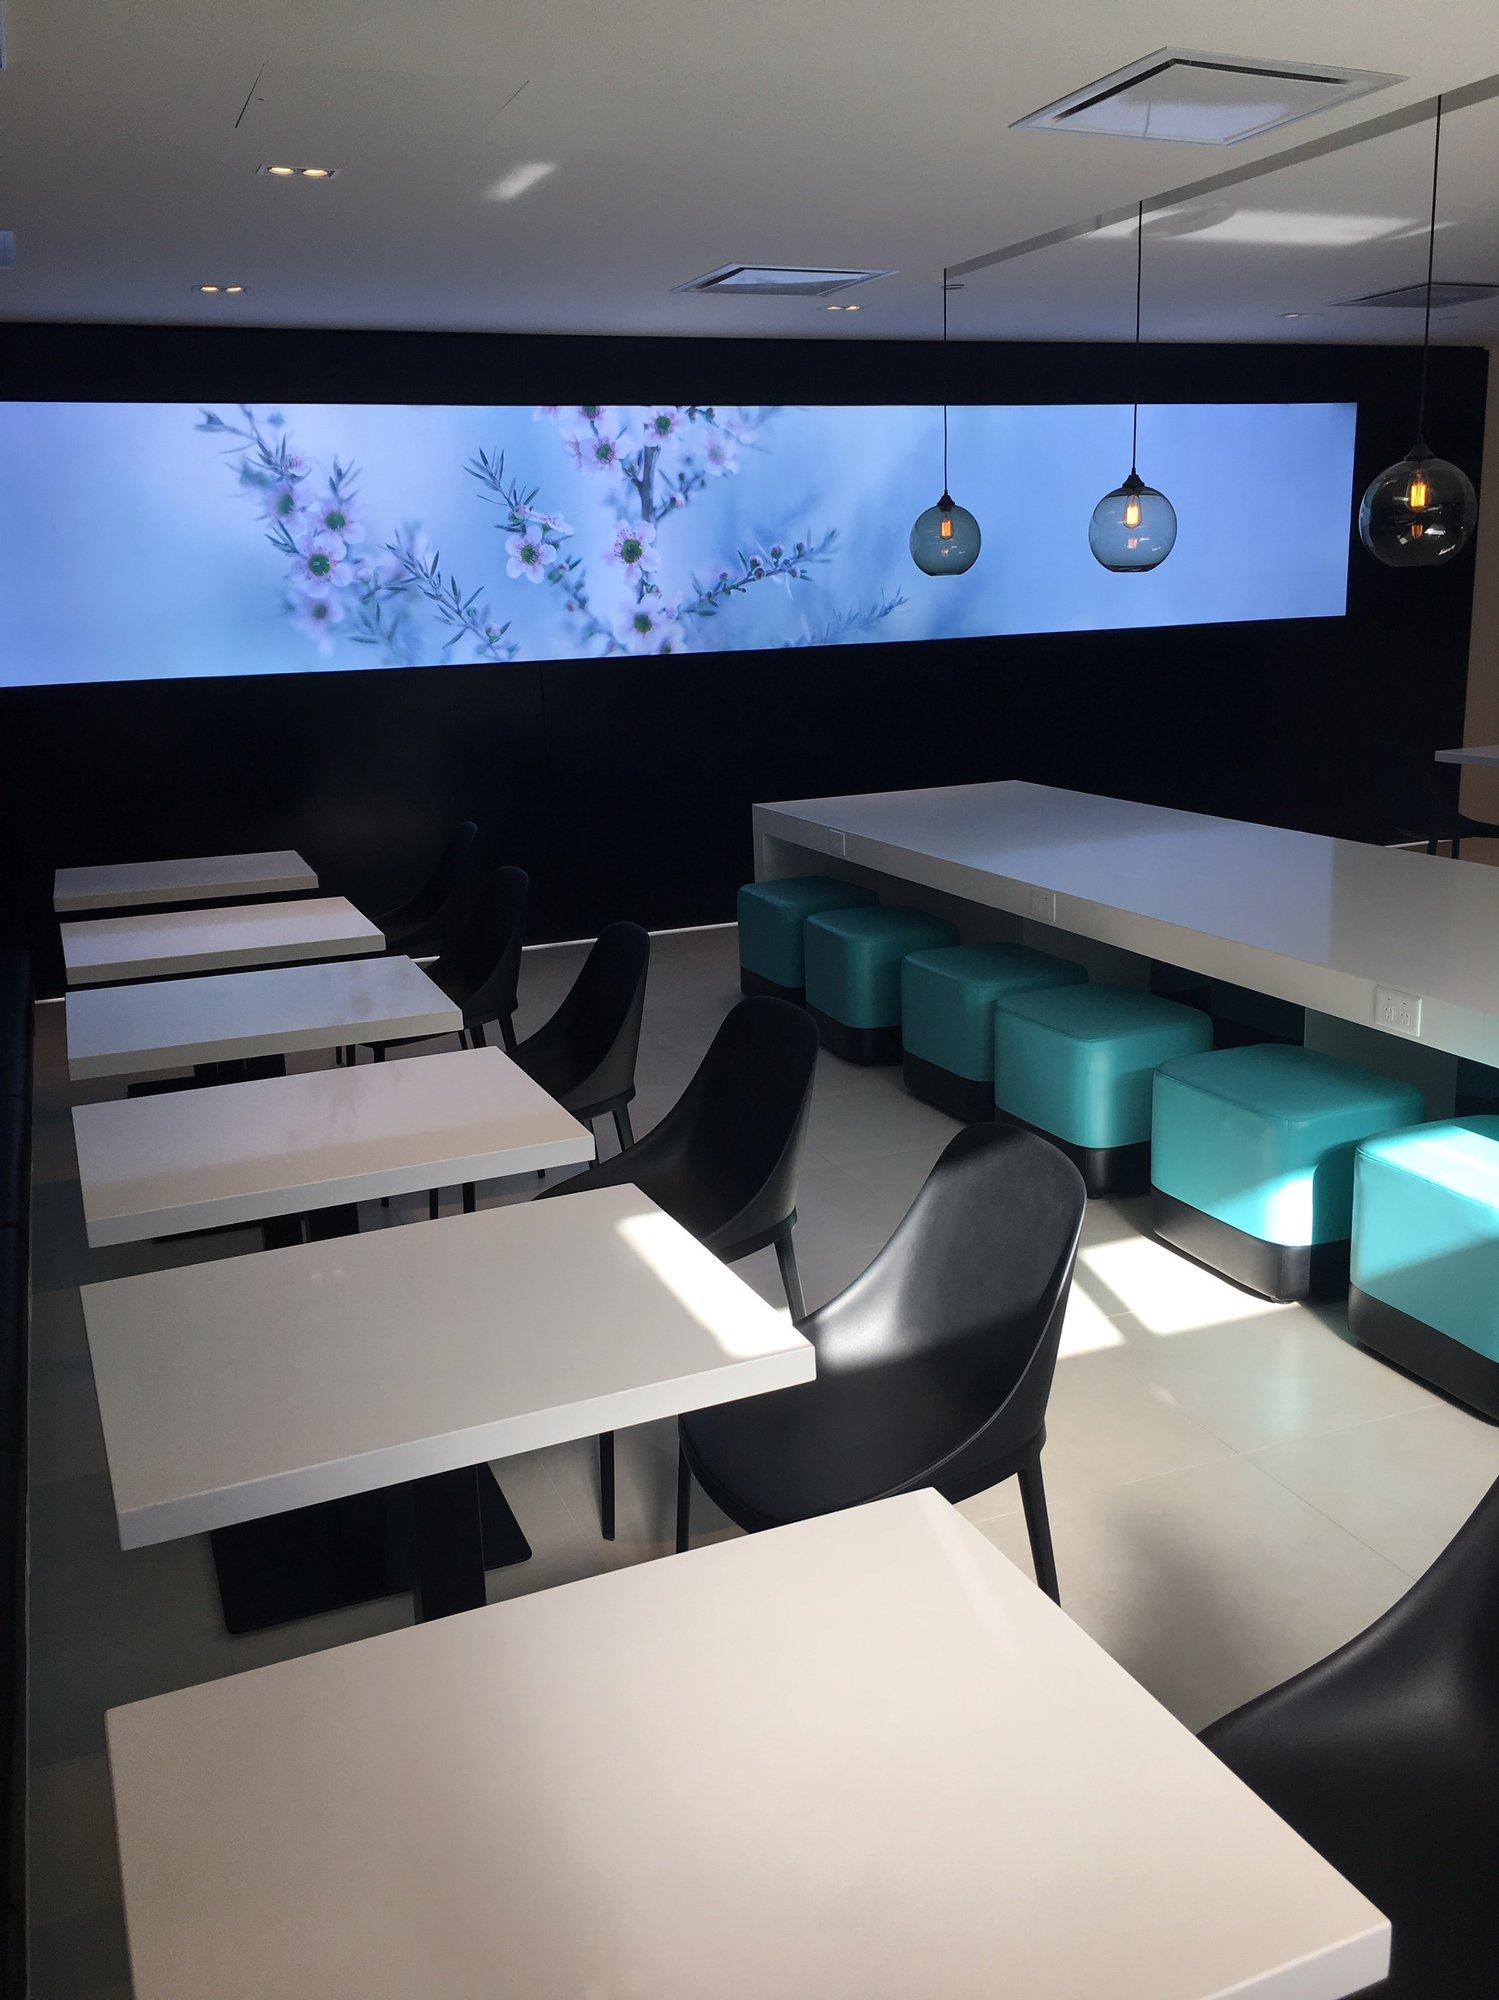 Air New Zealand Regional Lounge image 3 of 7